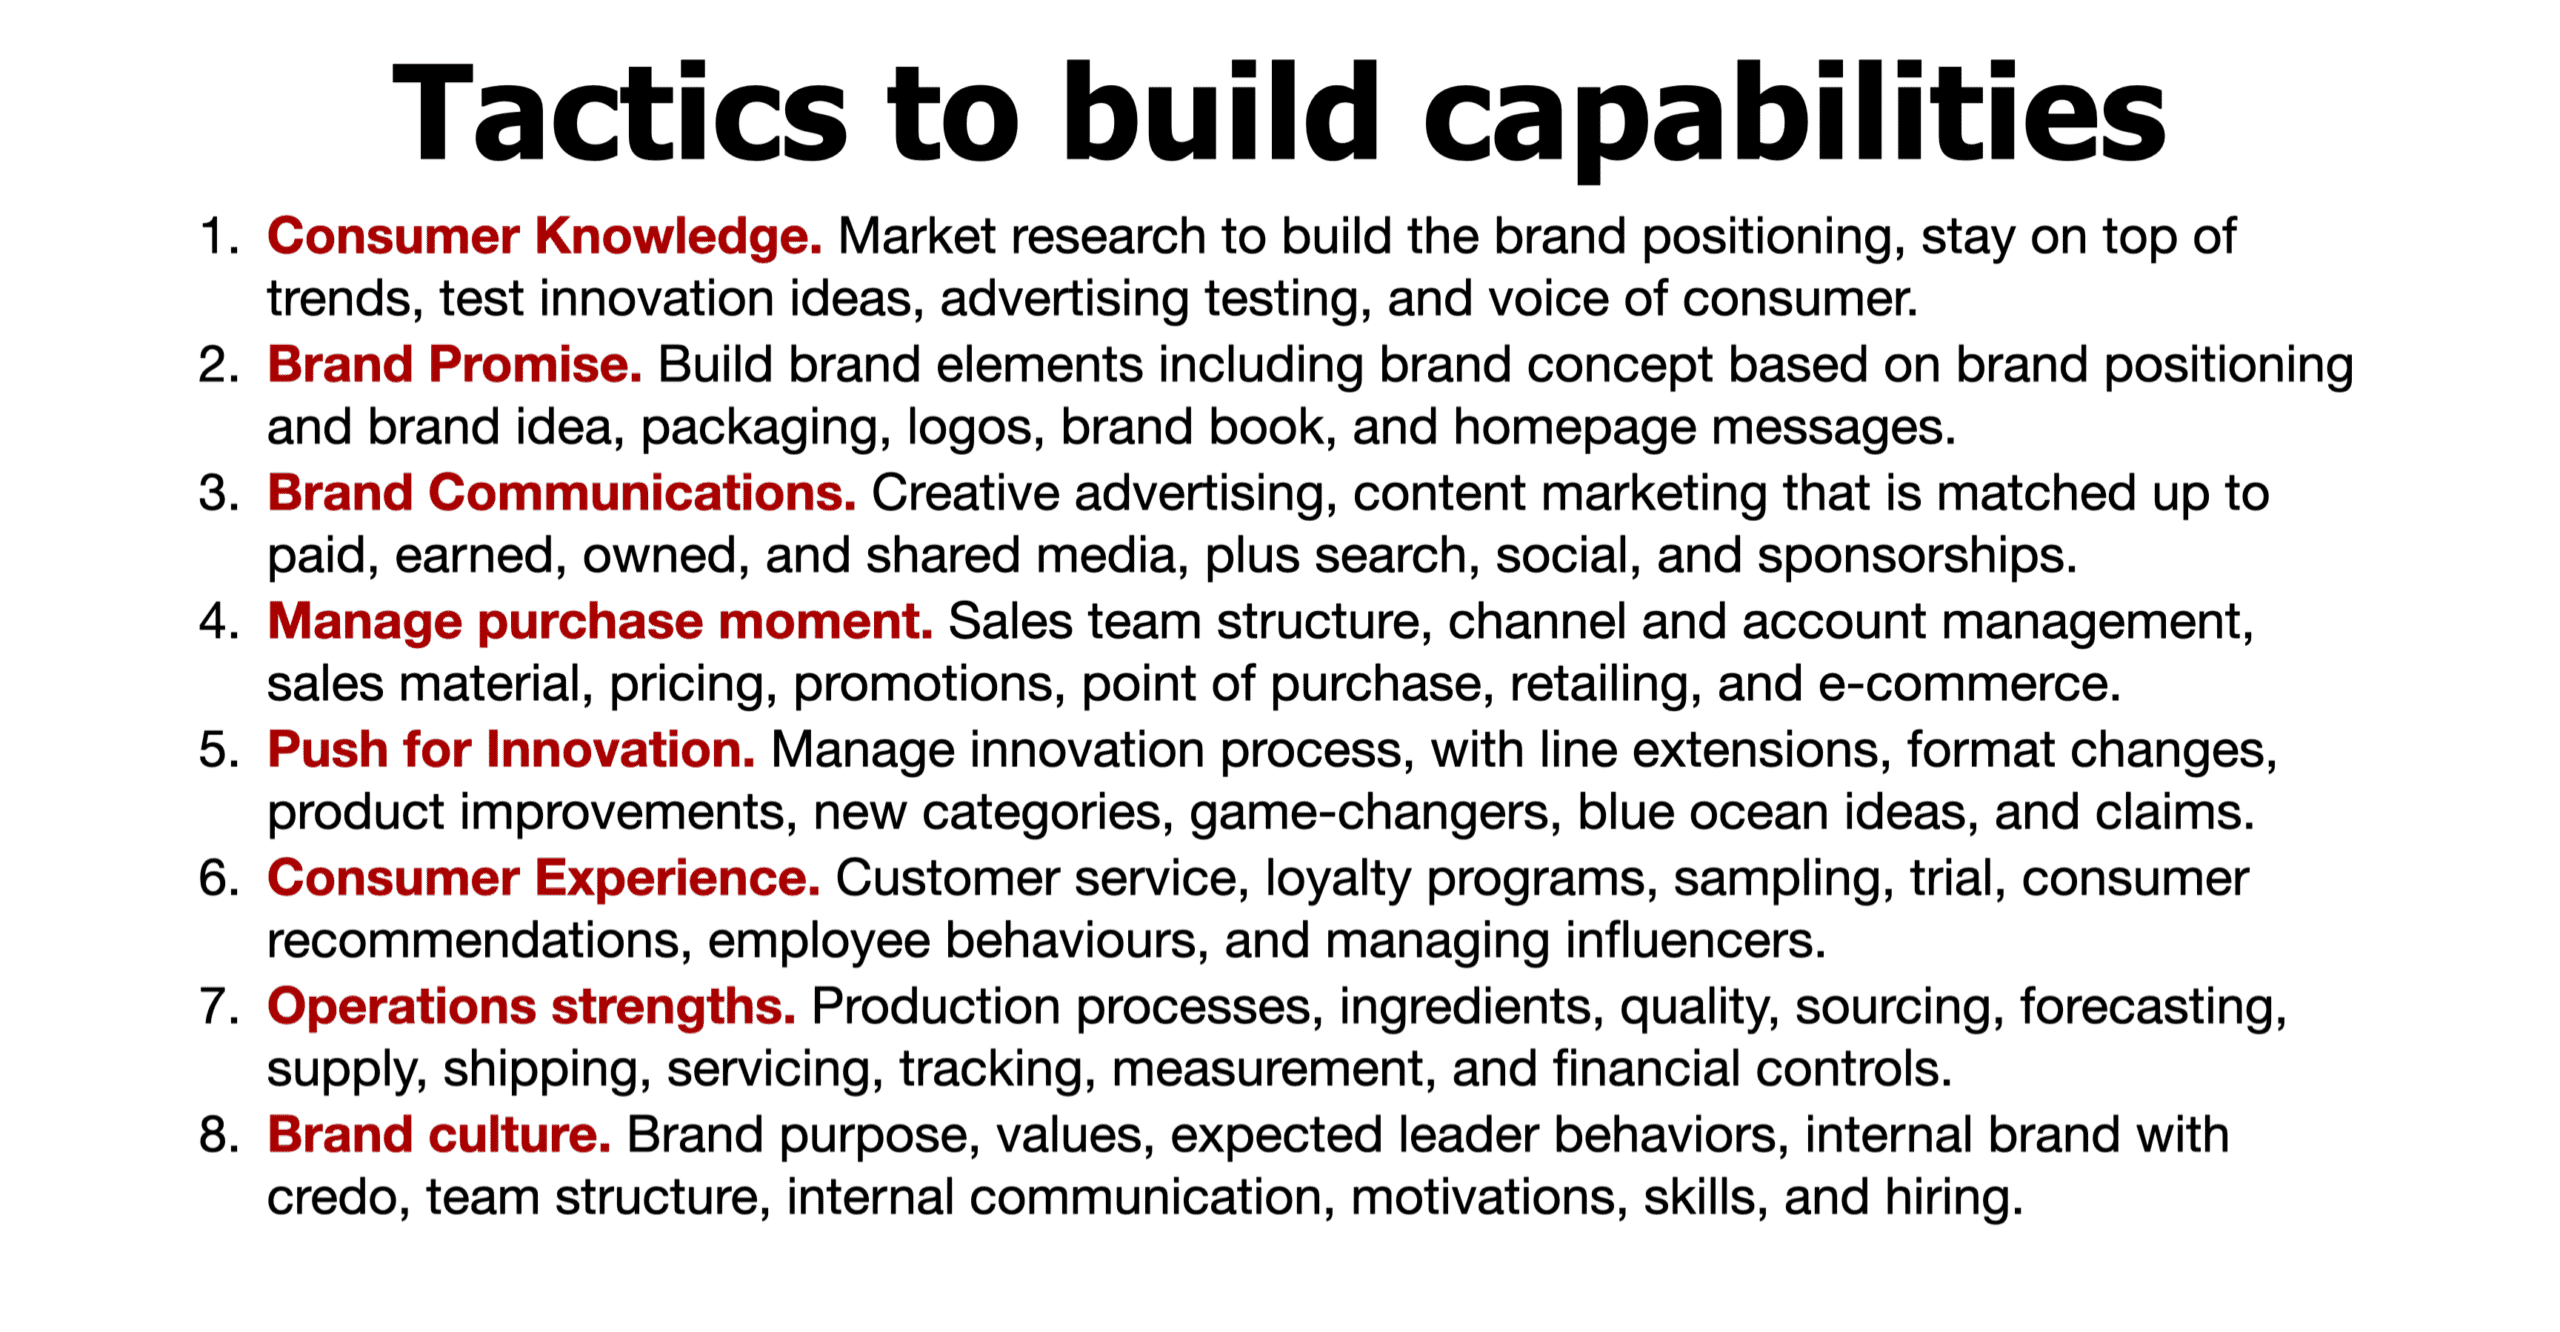 Building Capabilities to support the brand